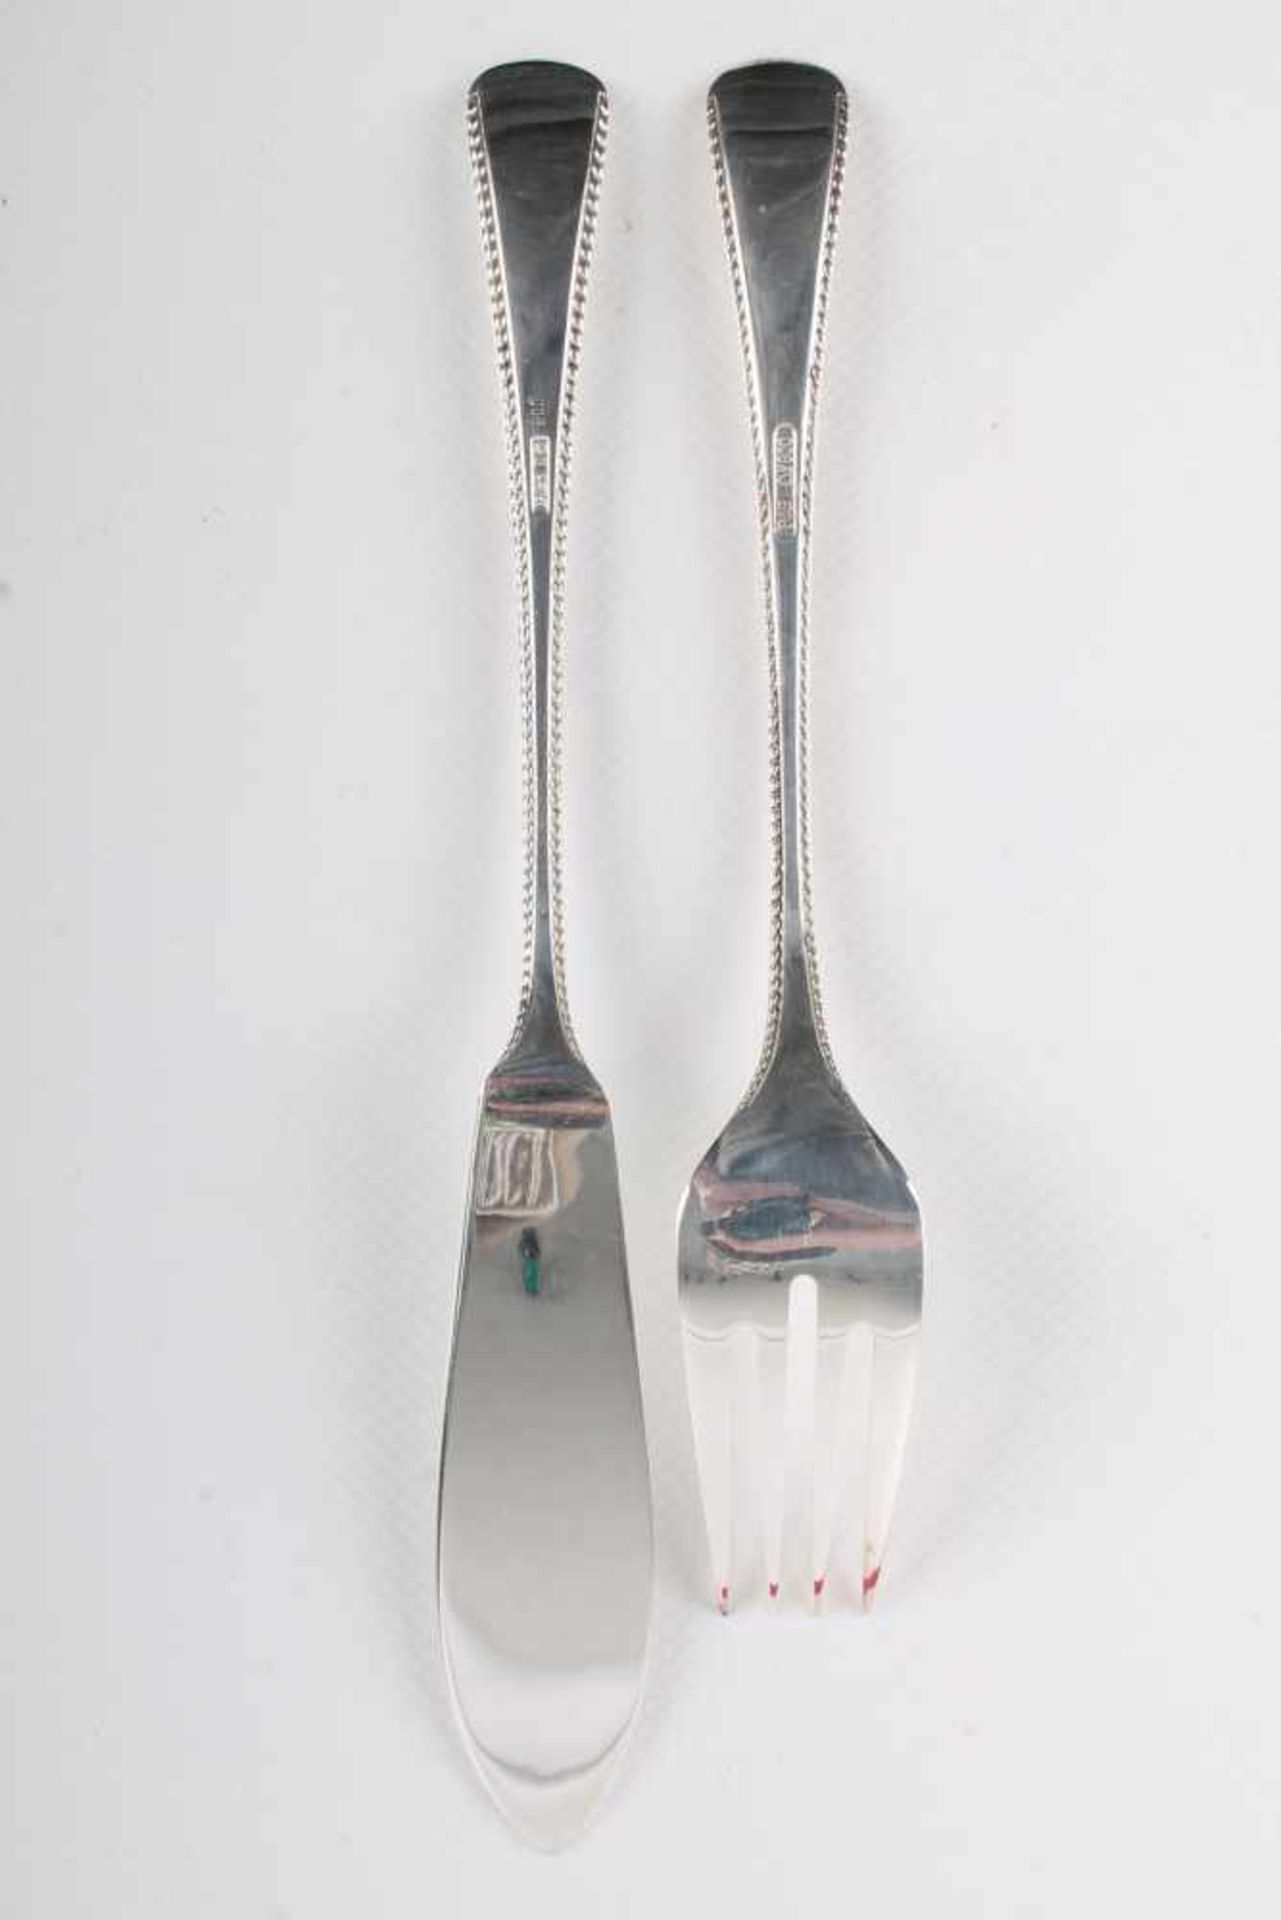 Robbe & Berking 800 Silber Fischbesteck für 6 Personen, fish cutlery for 6 persons, - Image 4 of 5